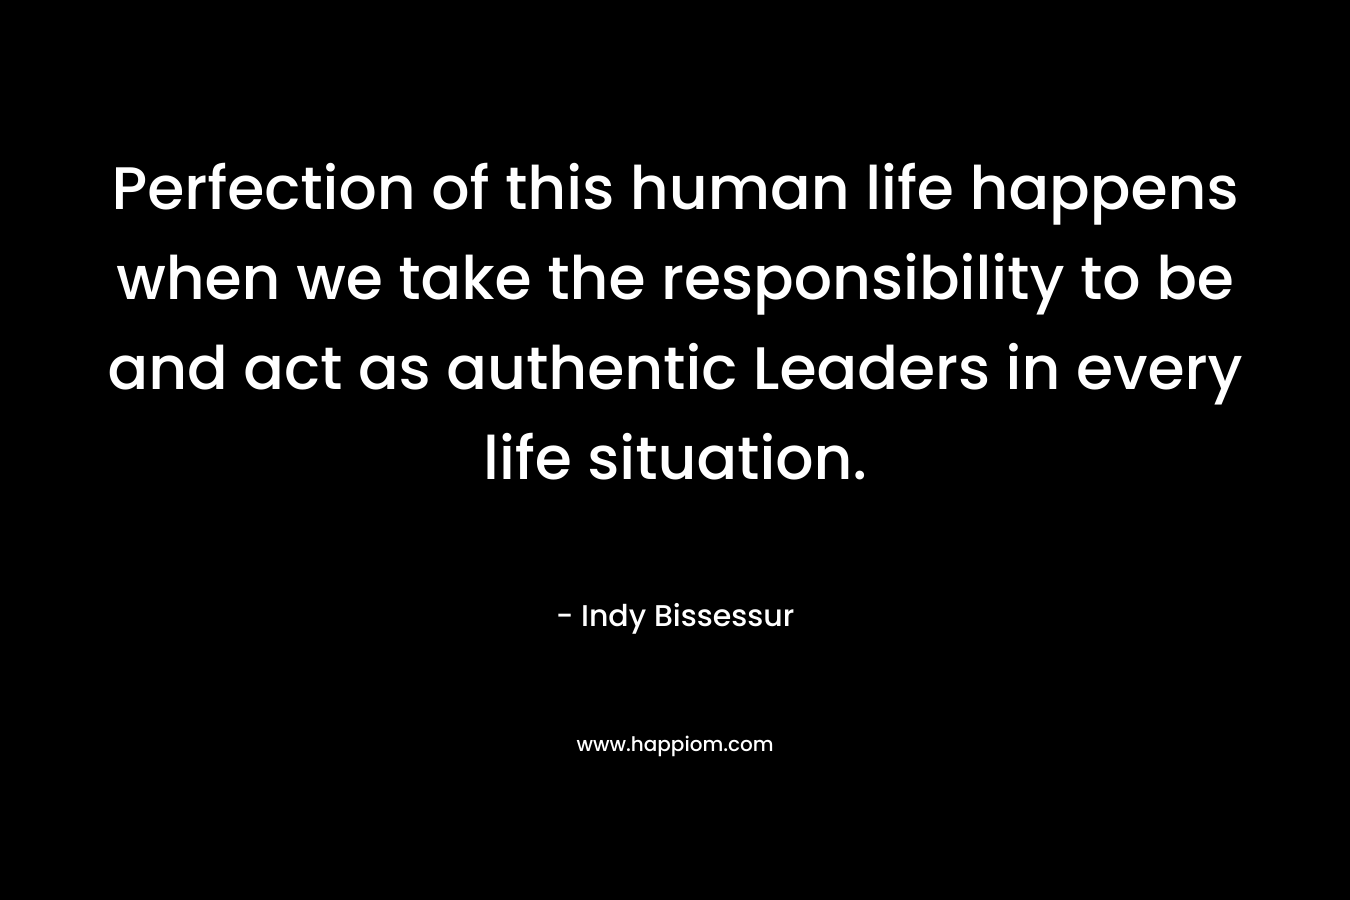 Perfection of this human life happens when we take the responsibility to be and act as authentic Leaders in every life situation.